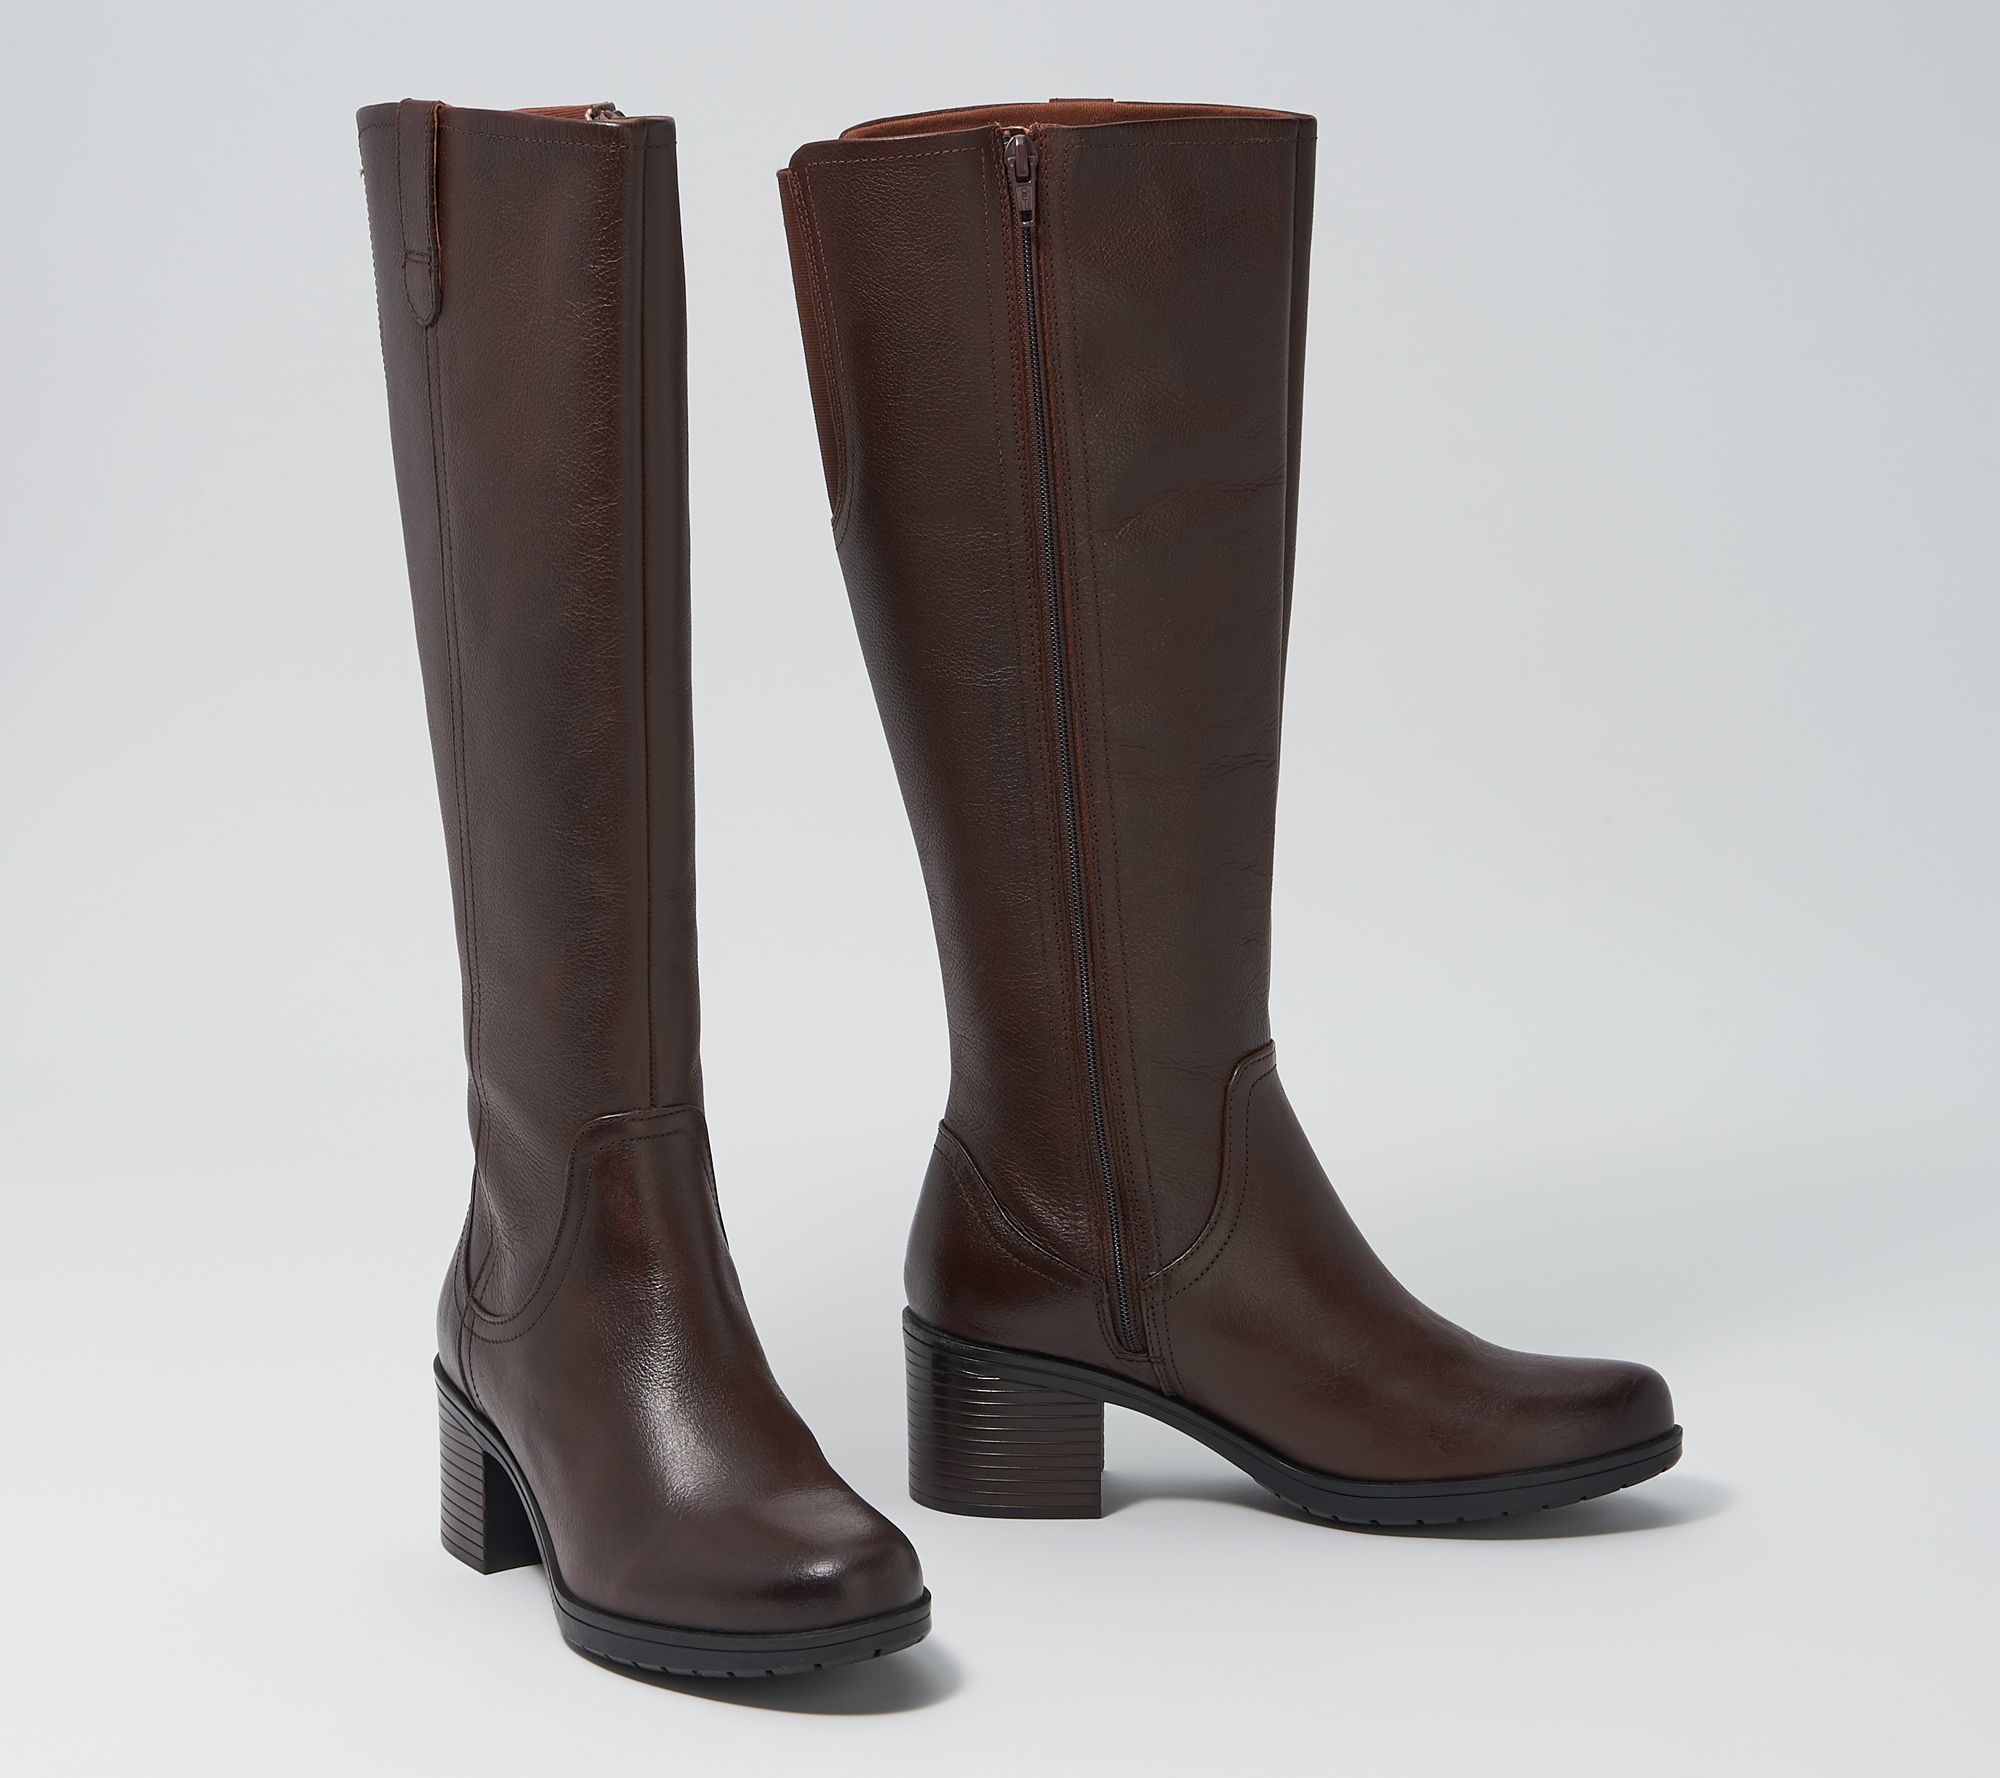 clarks wide shaft boots